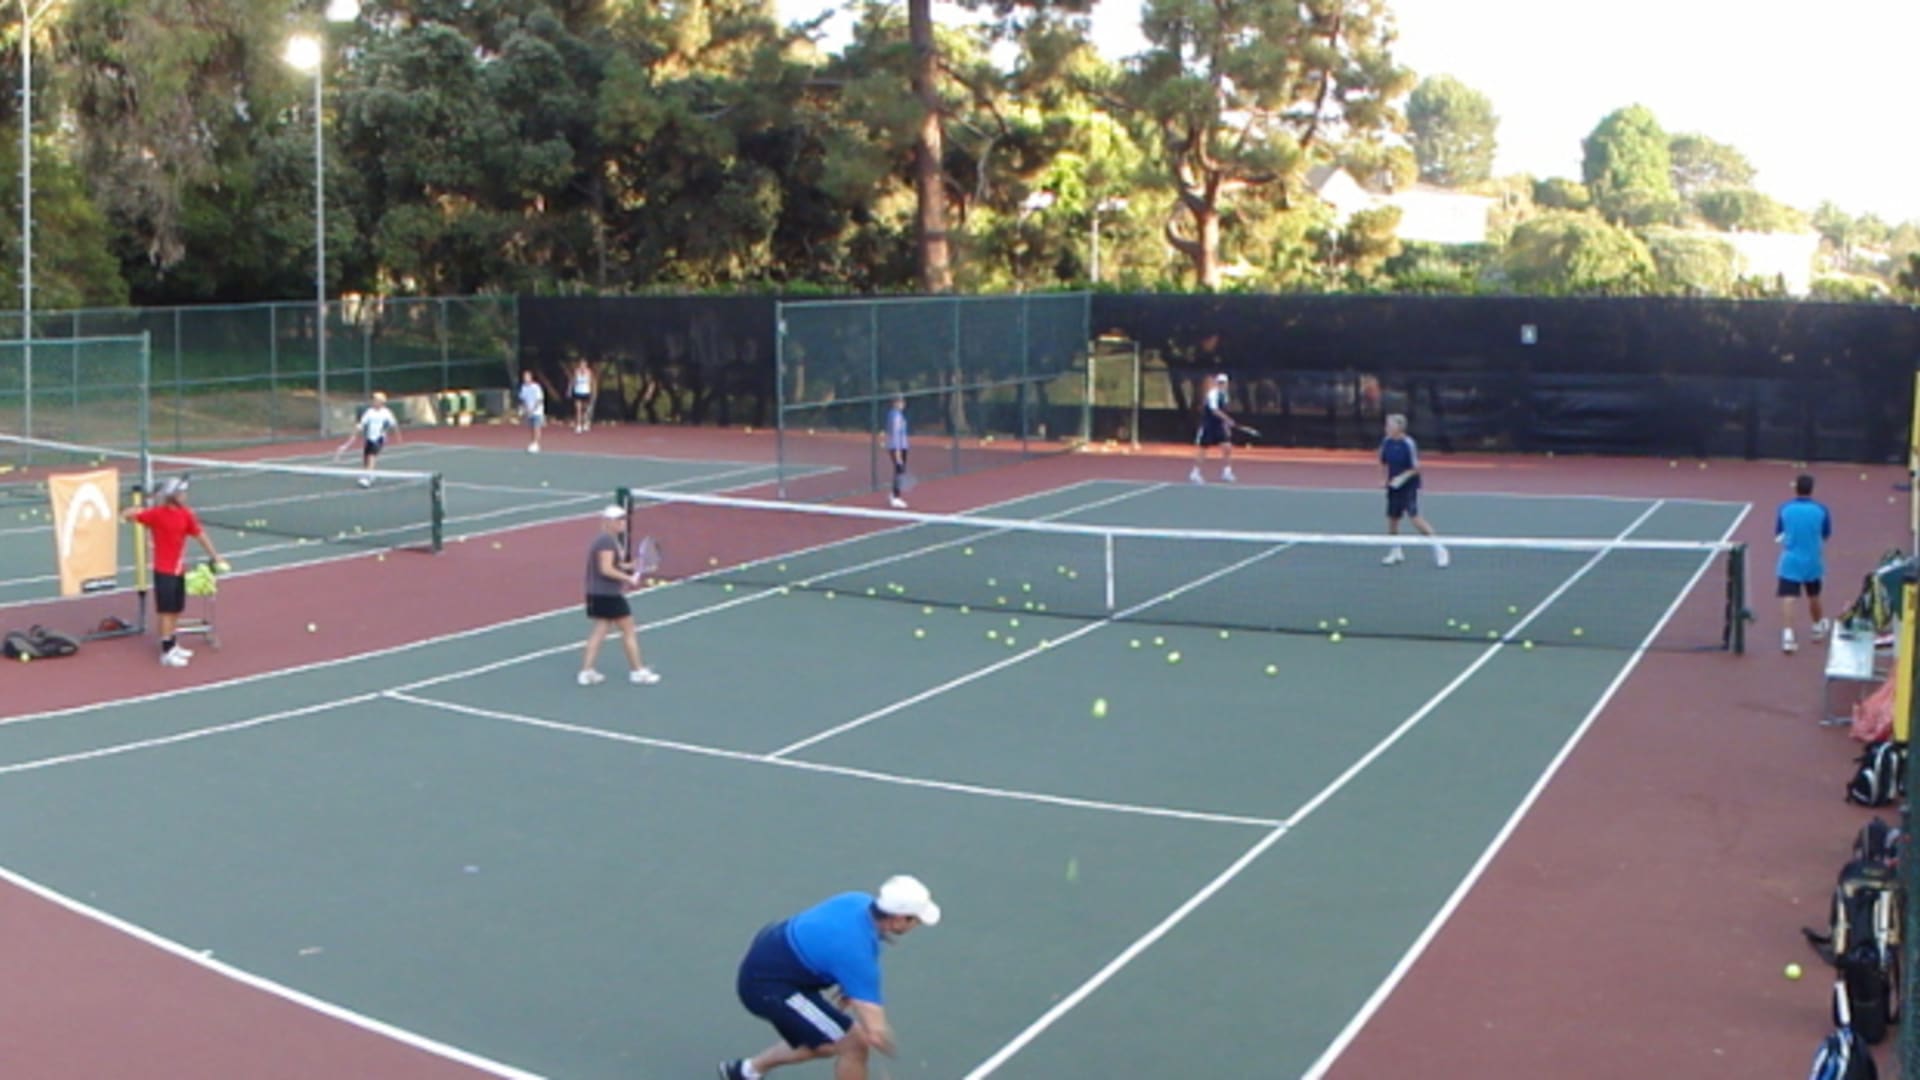 Live Ball Tennis done differently (and better?)